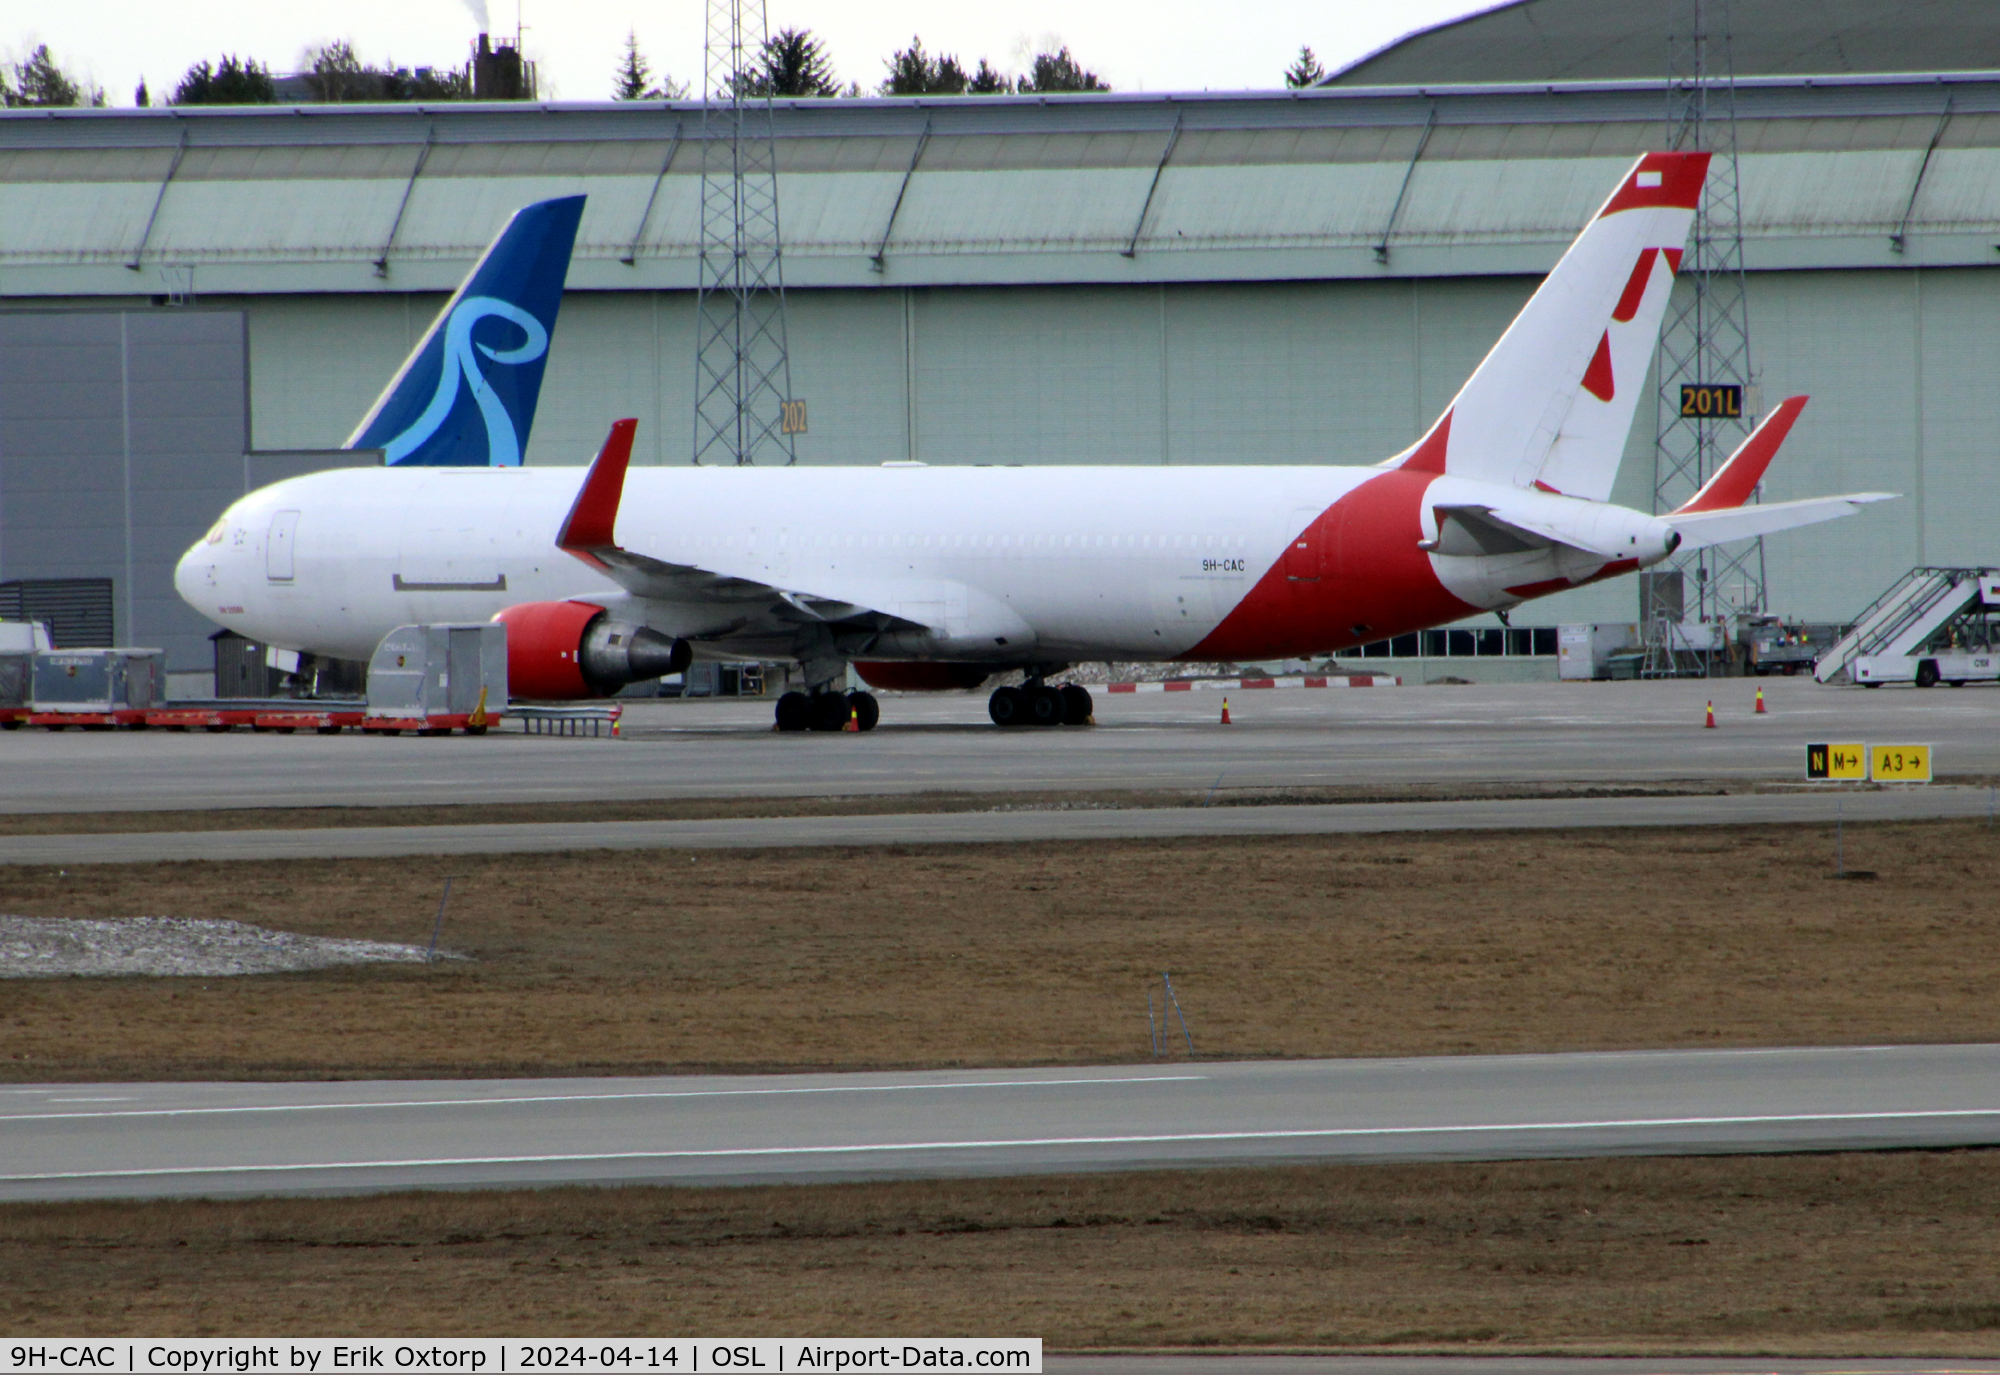 9H-CAC, 1996 Boeing 767-333/ER C/N 25588, 9H-CAC in OSL